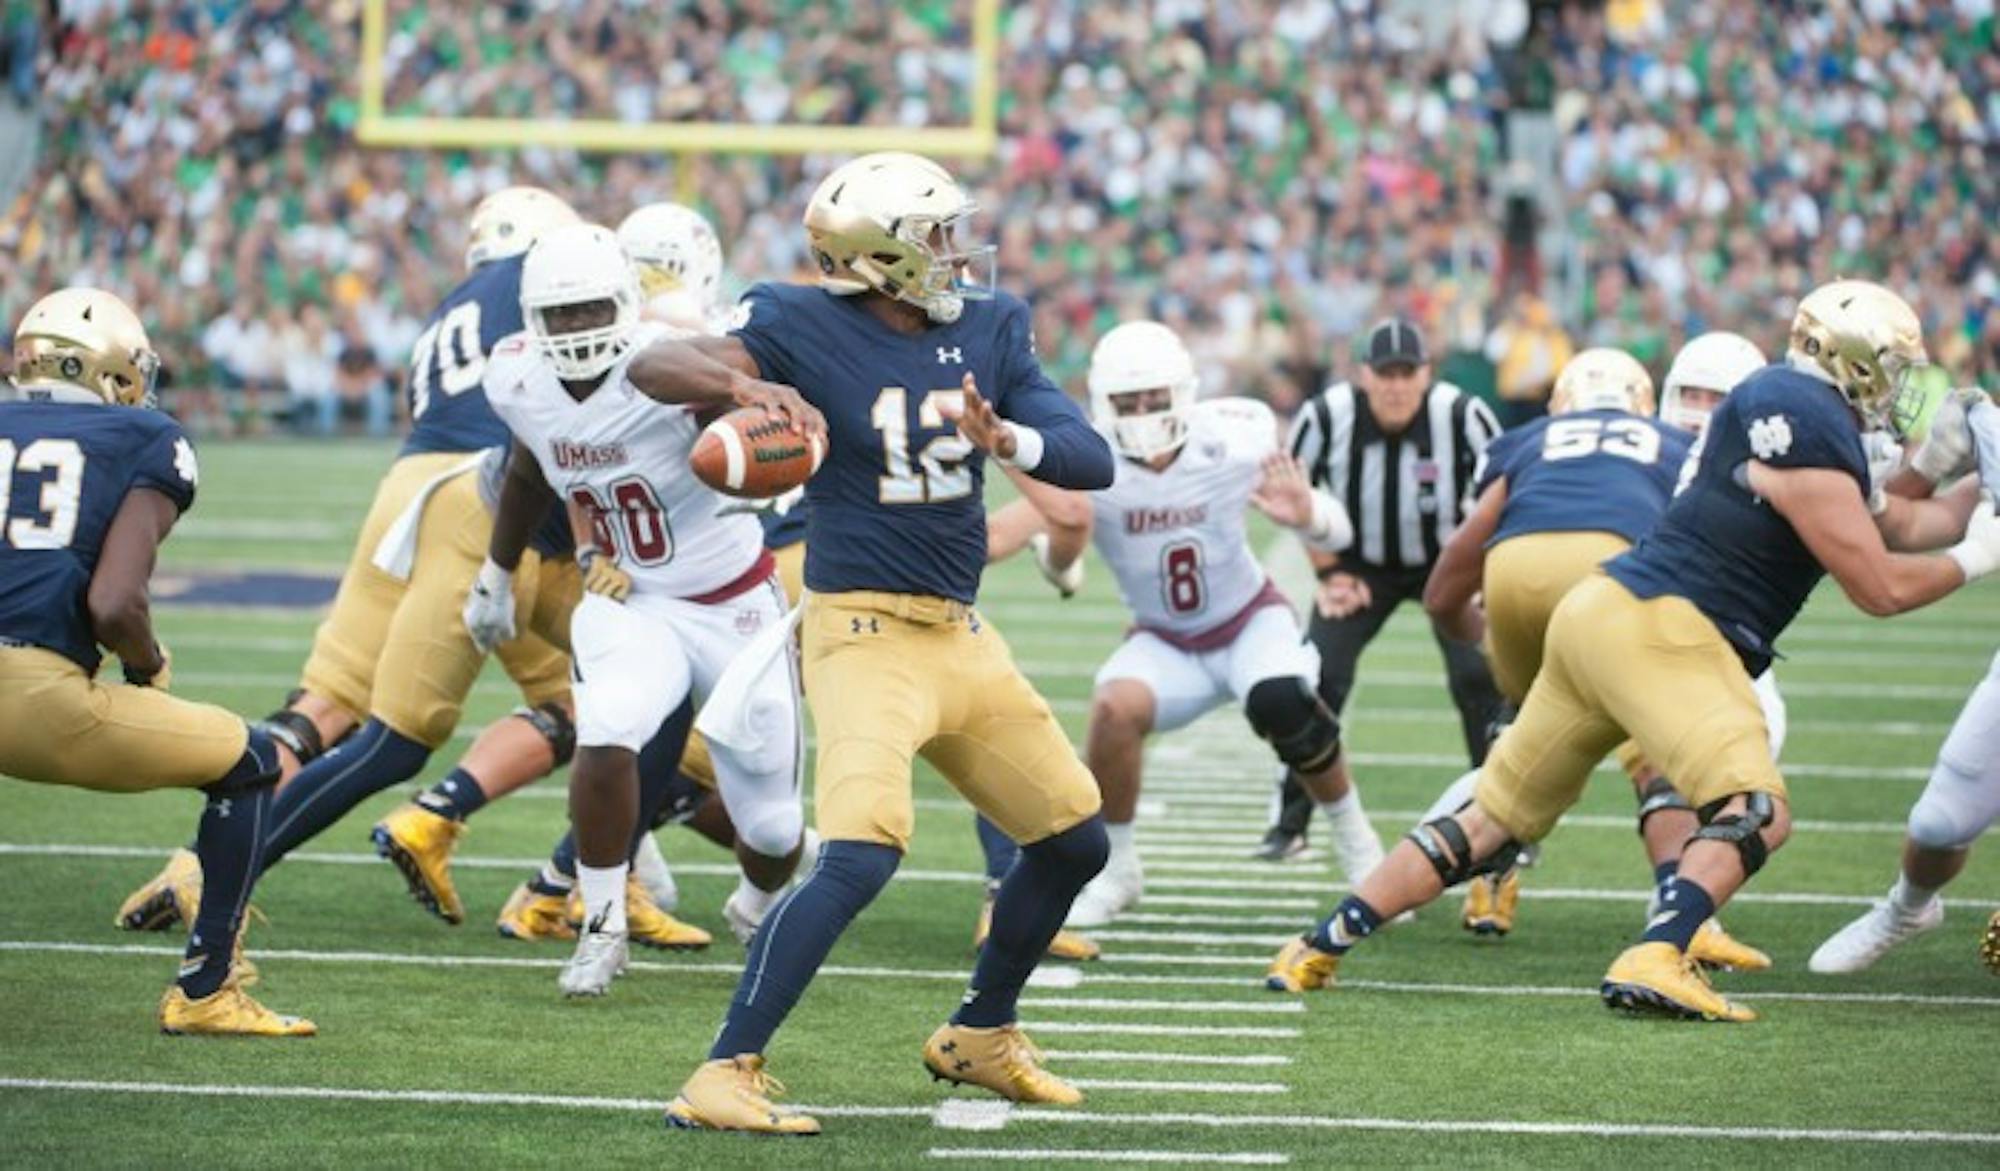 Irish junior quarterback Brandon Wimbush stares down his receiver and steps into a throw during Notre Dame’s 62-27 win over UMass on Sept. 26, 2015, at Notre Dame Stadium. Wimbush sat out the 2016 season as a redshirt, but now he stands to start at quarterback for the Irish in 2017 after last year’s starter, DeShone Kizer, declared for the NFL Draft.